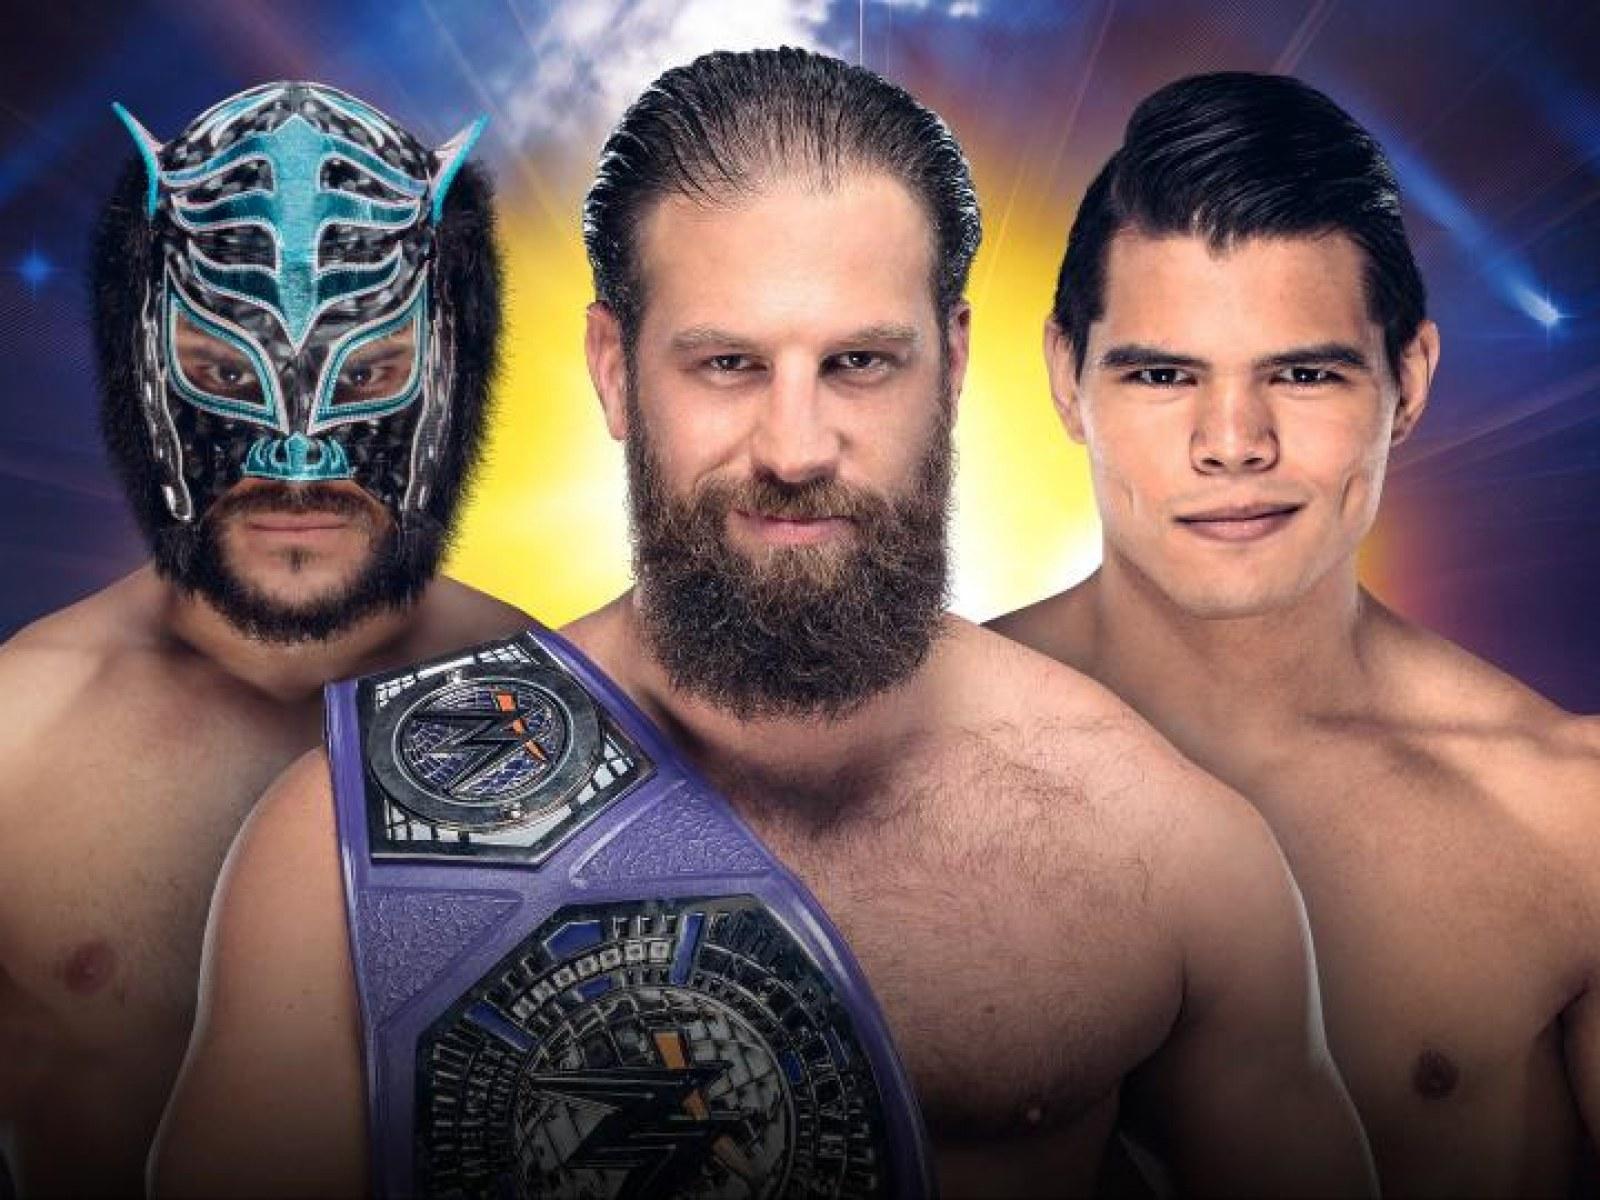 WWE Clash of Champions 2019 Predictions: Our Picks for this